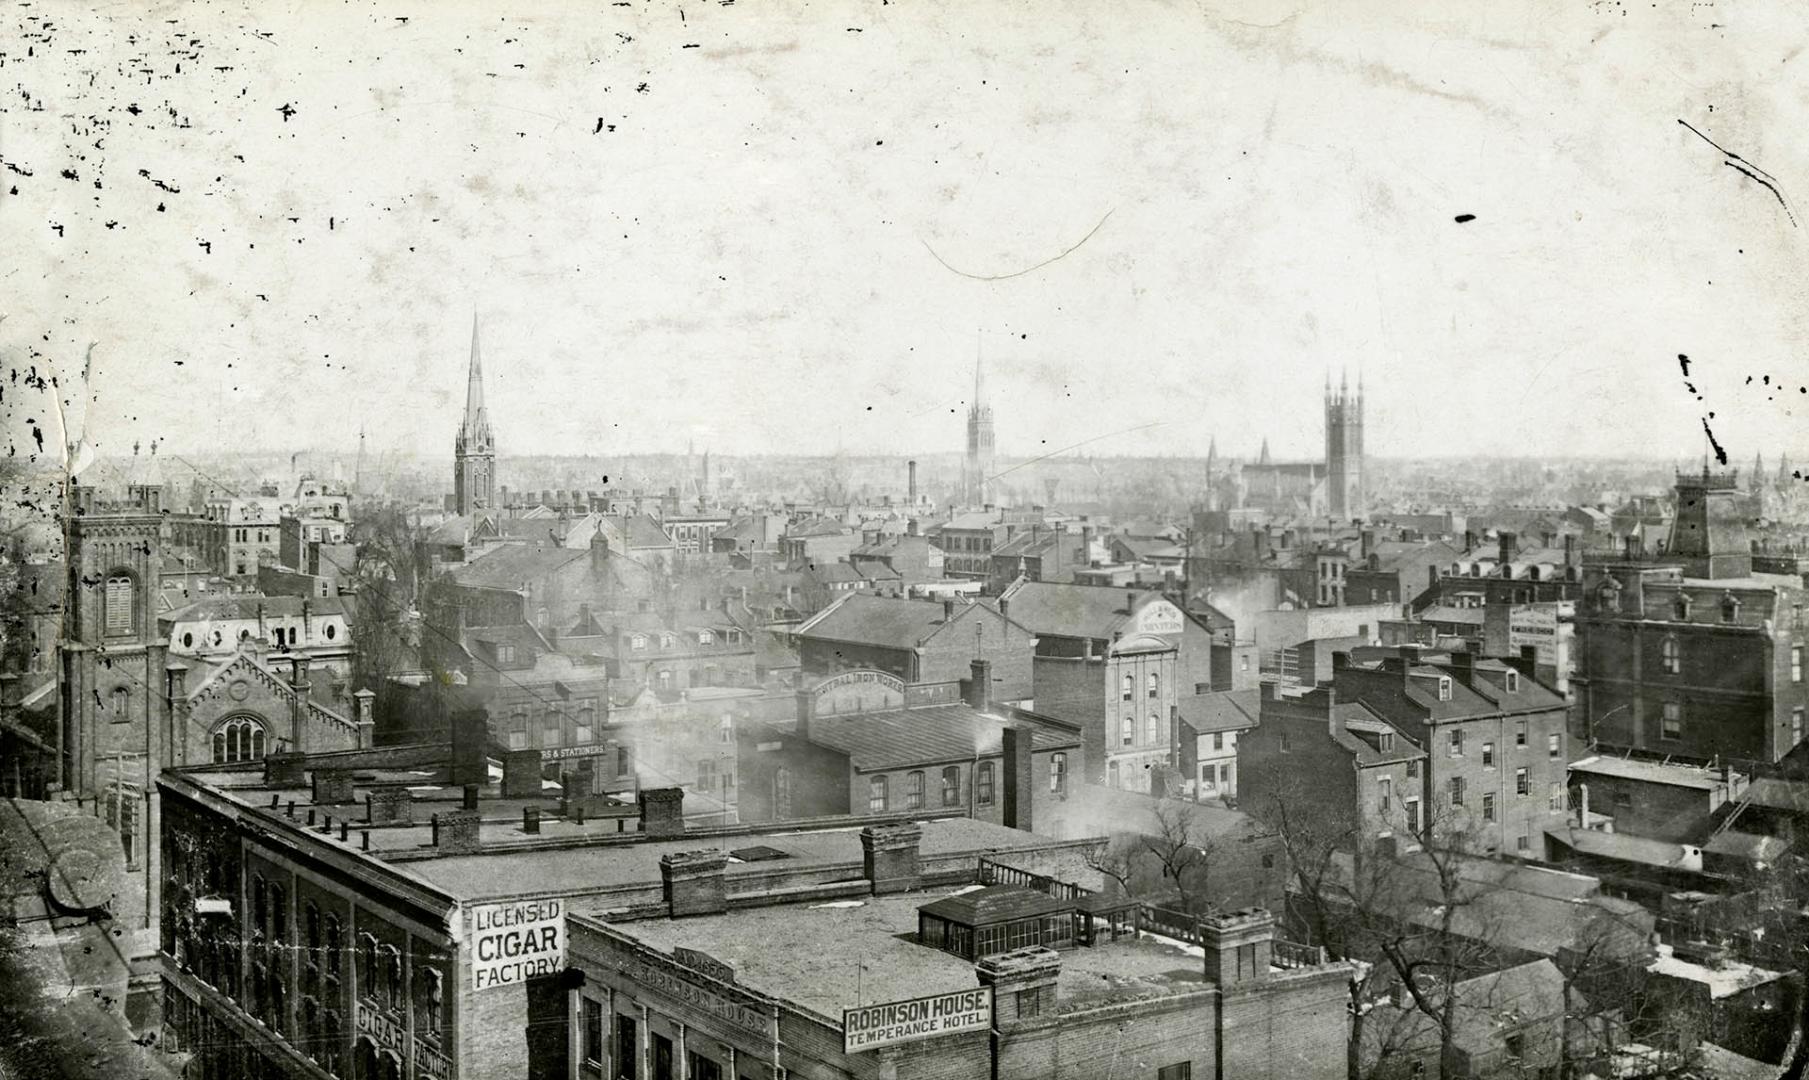 Toronto Downtown 1884 circa. Looking north east from roof of the Mail Building, King Street West, northwest corner Bay St